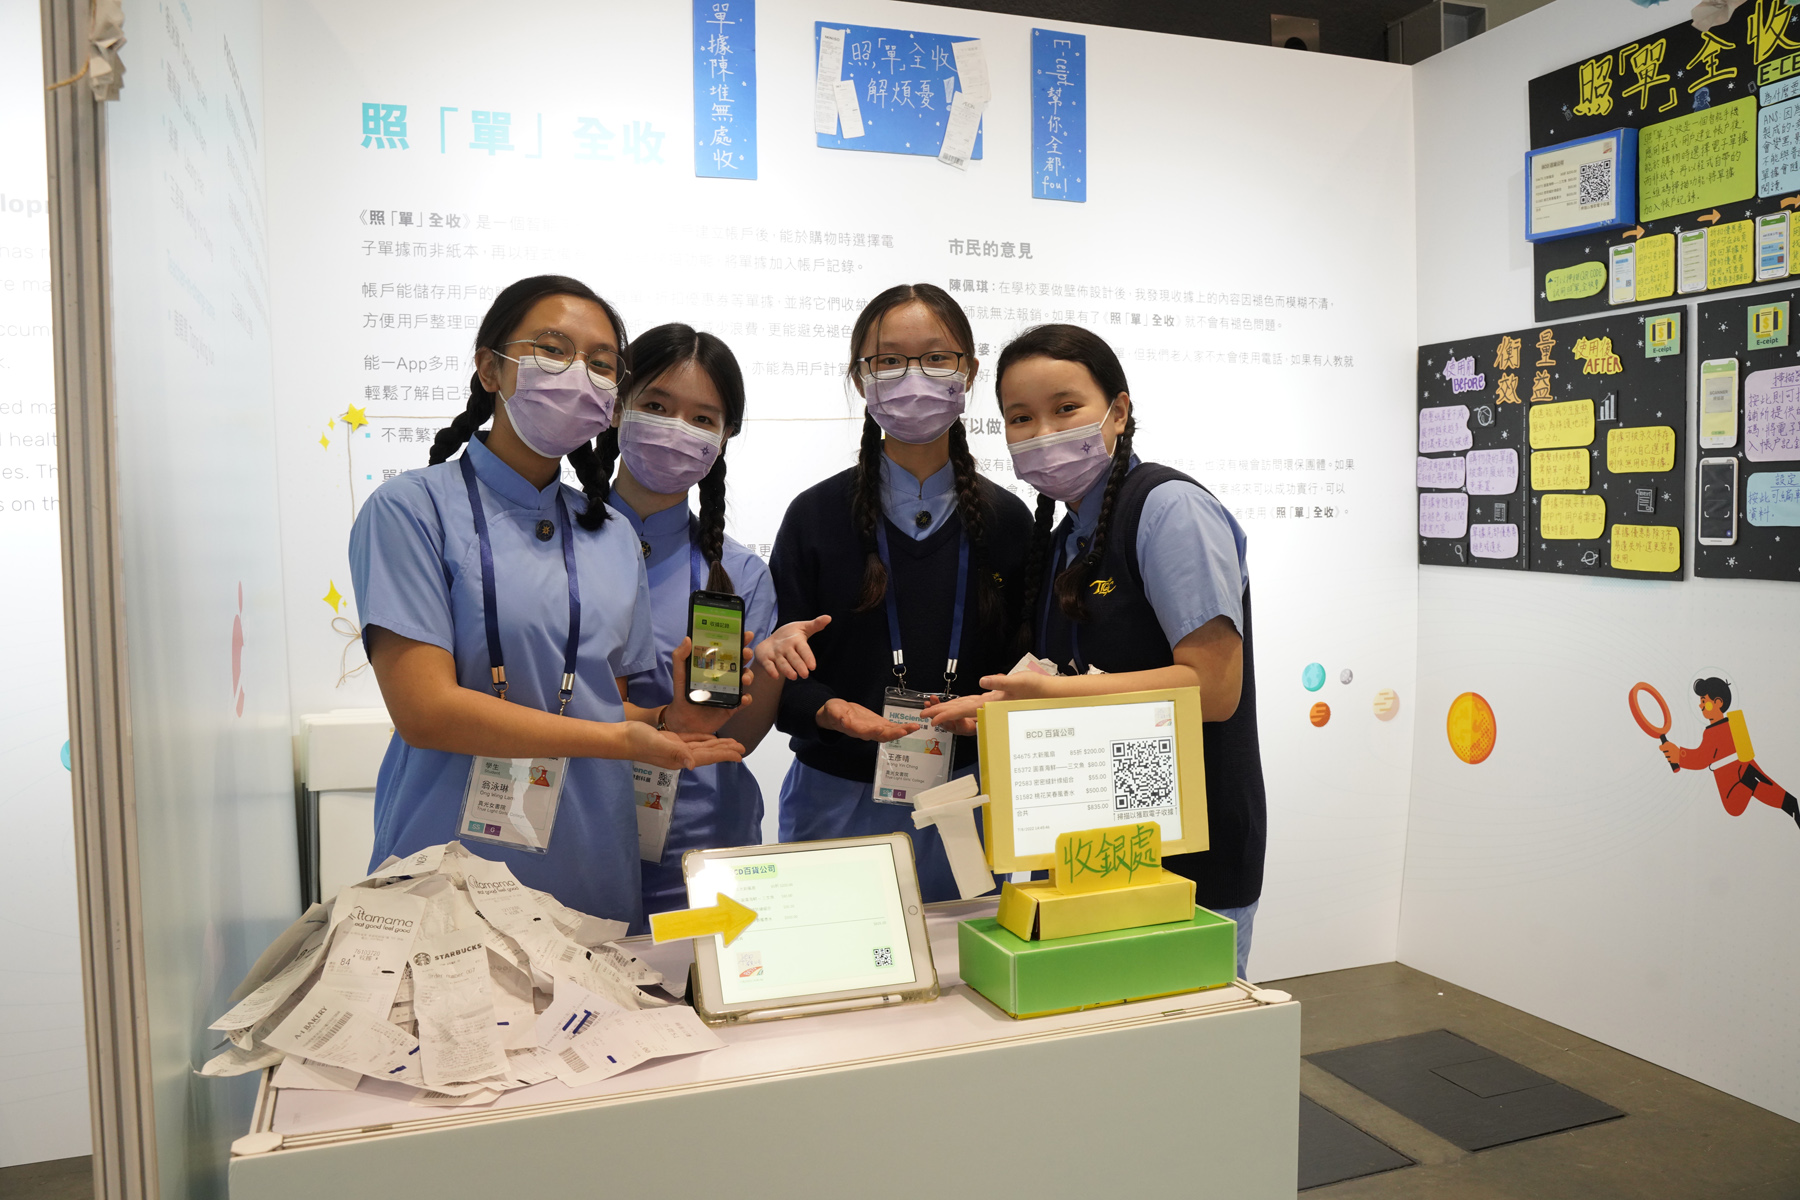 20220627 – TLGC Girls aim to tackle paper waste with their invention, E-ceipt